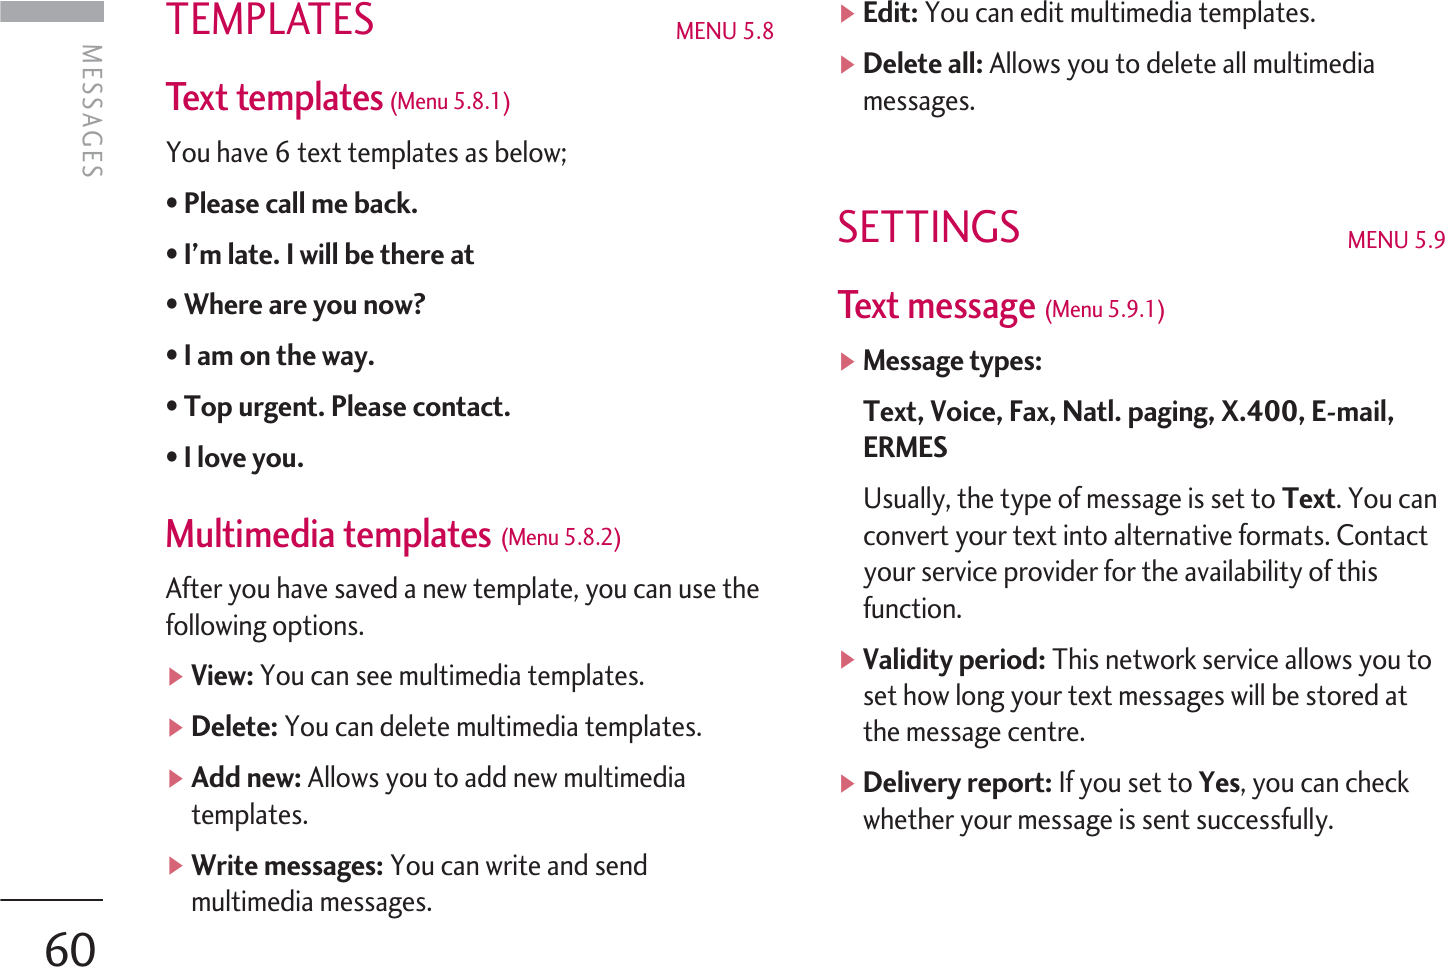 TEMPLATES MENU 5.8 Text templates(Menu 5.8.1) You have 6 text templates as below;• Please call me back. • I’m late. I will be there at •Where are you now? •I am on the way. • Top urgent. Please contact. • I love you. Multimedia templates (Menu 5.8.2)After you have saved a new template, you can use thefollowing options.]View: You can see multimedia templates.]Delete: You can delete multimedia templates.]Add new: Allows you to add new multimediatemplates.]Write messages: You can write and sendmultimedia messages.]Edit: You can edit multimedia templates.]Delete all: Allows you to delete all multimediamessages.SETTINGS  MENU 5.9Text message (Menu 5.9.1)]Message types:Text, Voice, Fax, Natl. paging, X.400, E-mail,ERMESUsually, the type of message is set to Text. You canconvert your text into alternative formats. Contactyour service provider for the availability of thisfunction.]Validity period: This network service allows you toset how long your text messages will be stored atthe message centre.]Delivery report: If you set to Yes, you can checkwhether your message is sent successfully.MESSAGES 60MESSAGES  